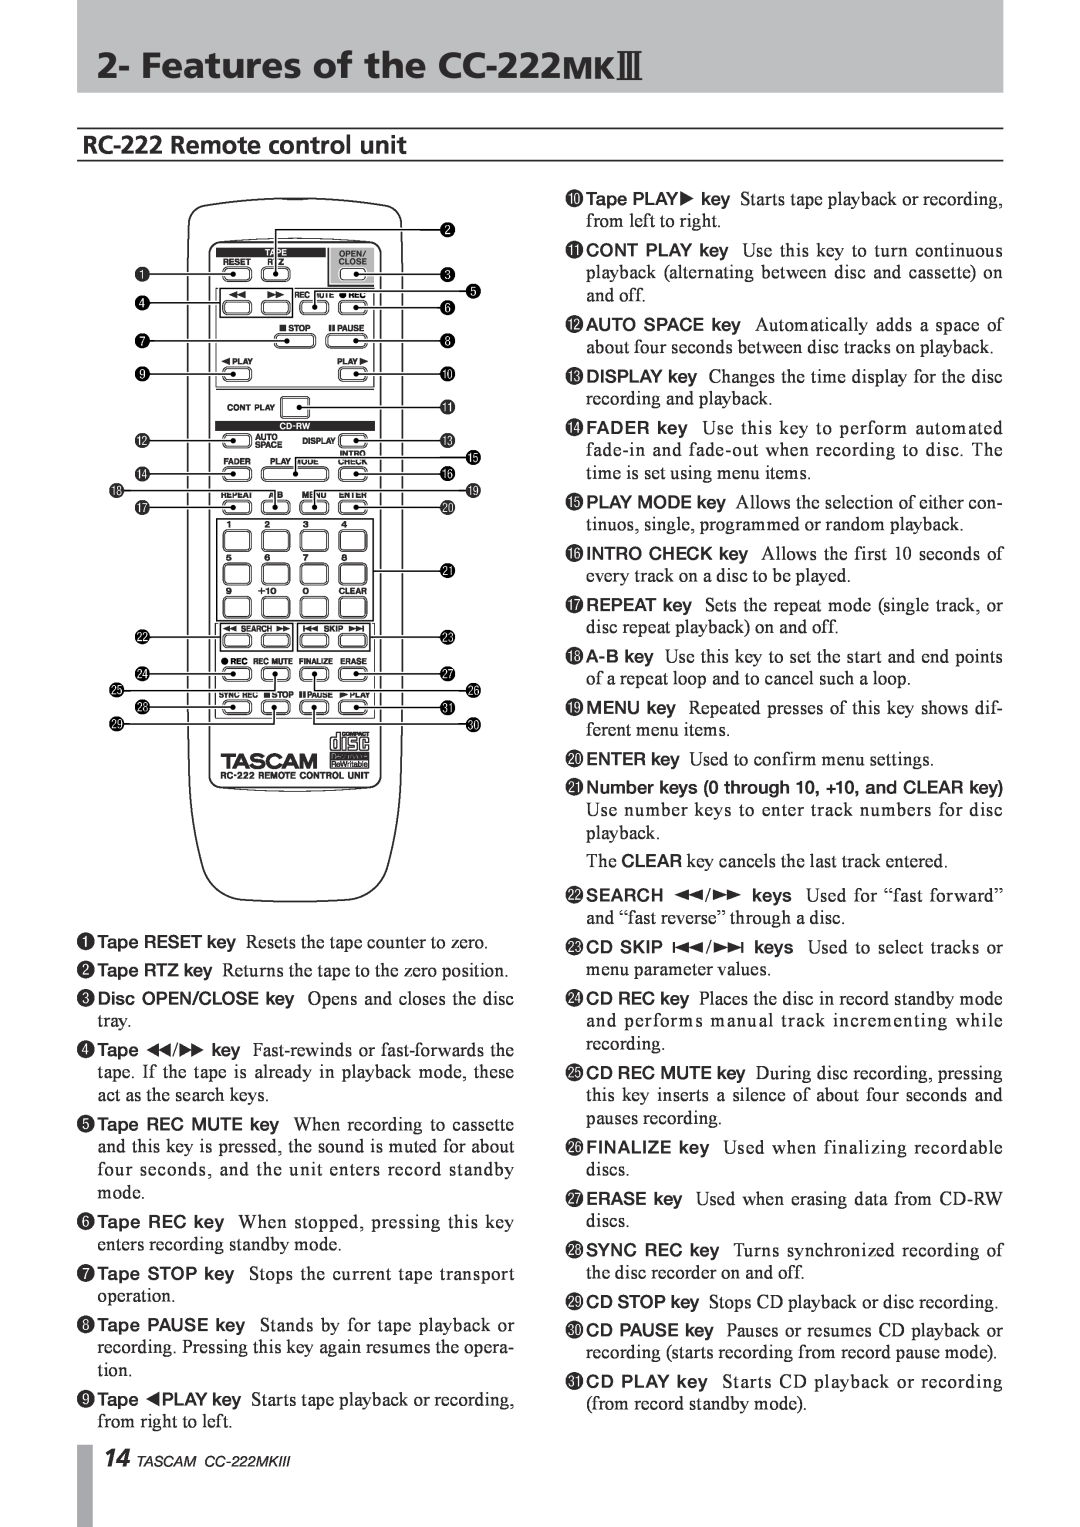 Tascam owner manual RC-222Remote control unit, Features of the CC-222MK$ 